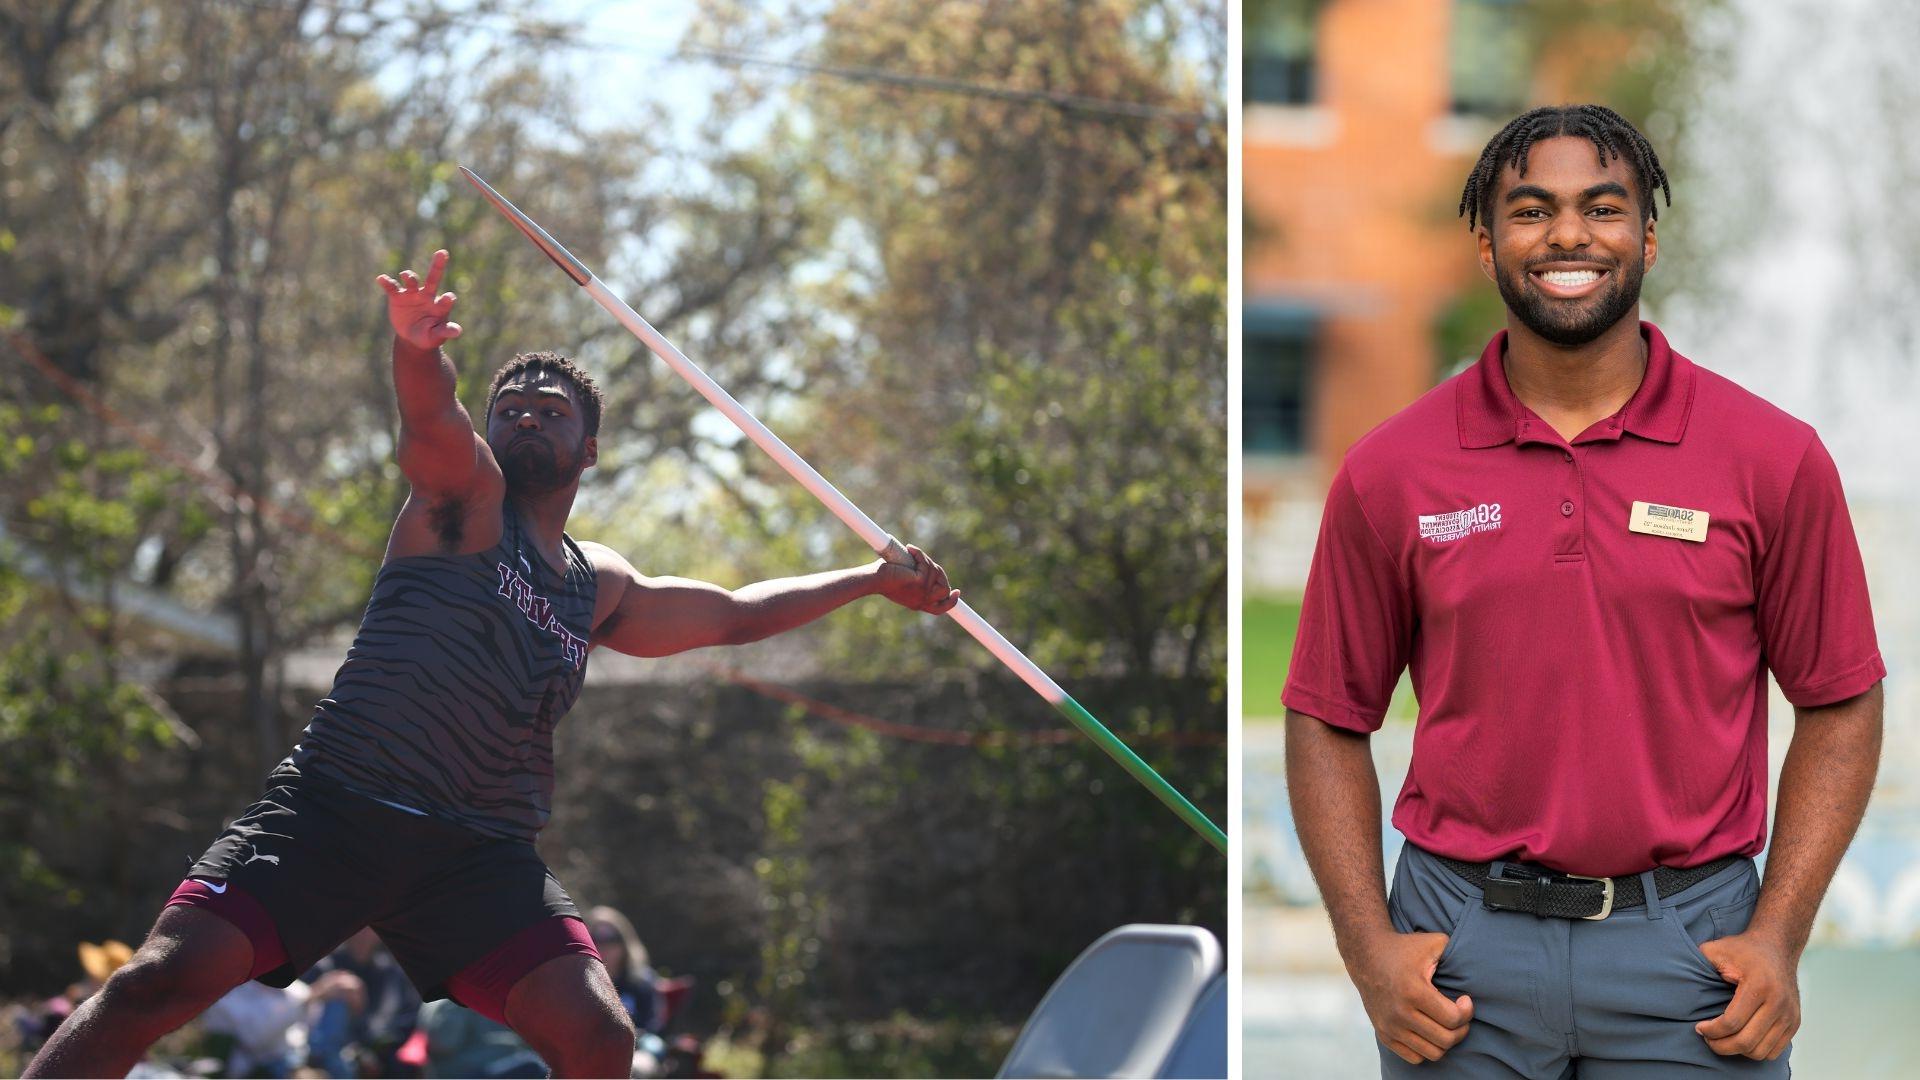 a collage of Pierce Jackson '25 wearing his SGA shirt in front of Miller Fountain (left) and Pierce throwing a javelin wearing his track and field jersey (right).